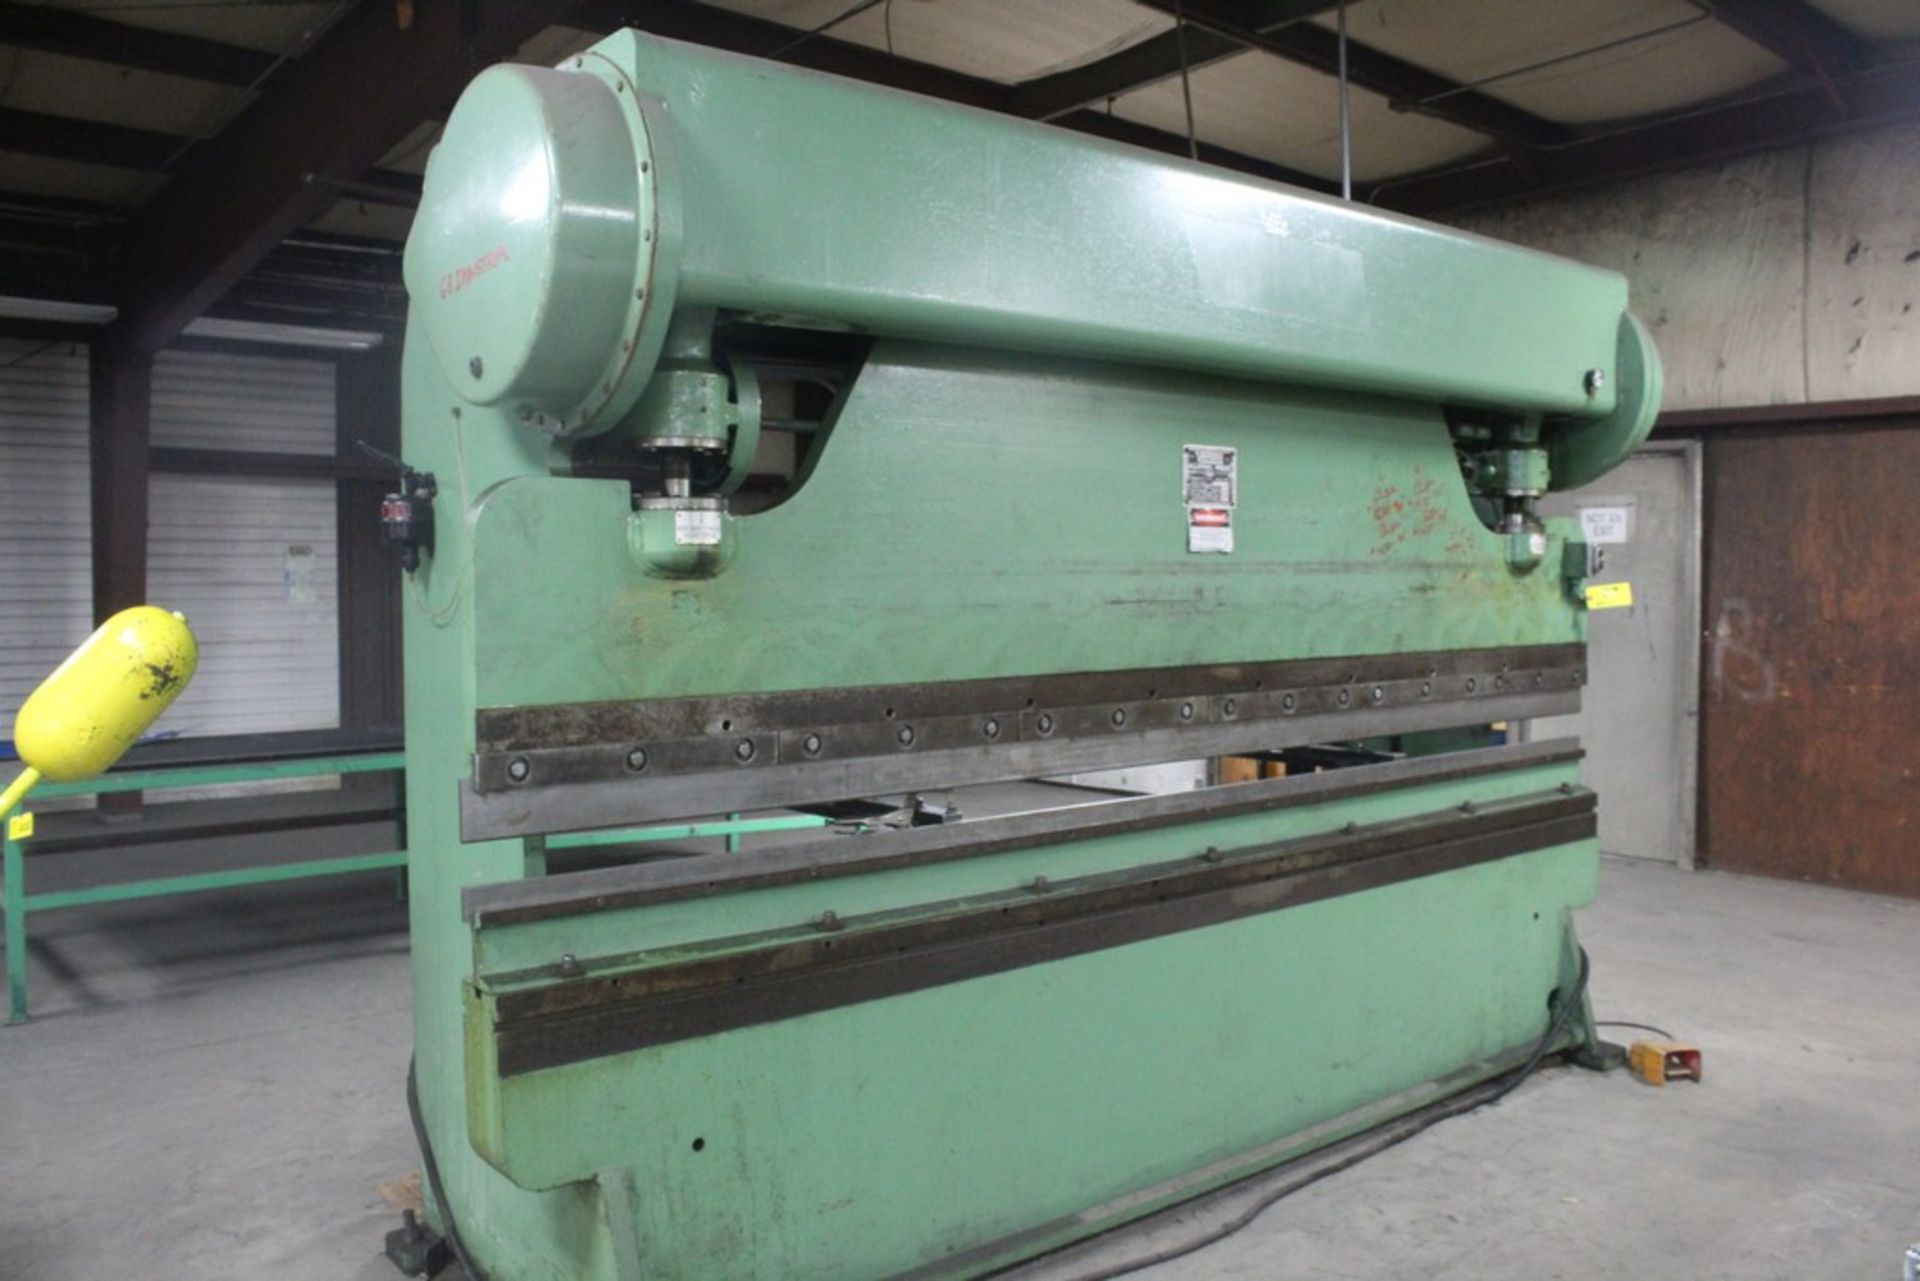 Verson Model 2010-65 Mechanical Power Press Brake, Serial Number: 20844 90 Ton - 12' Overall - Air - Image 3 of 7